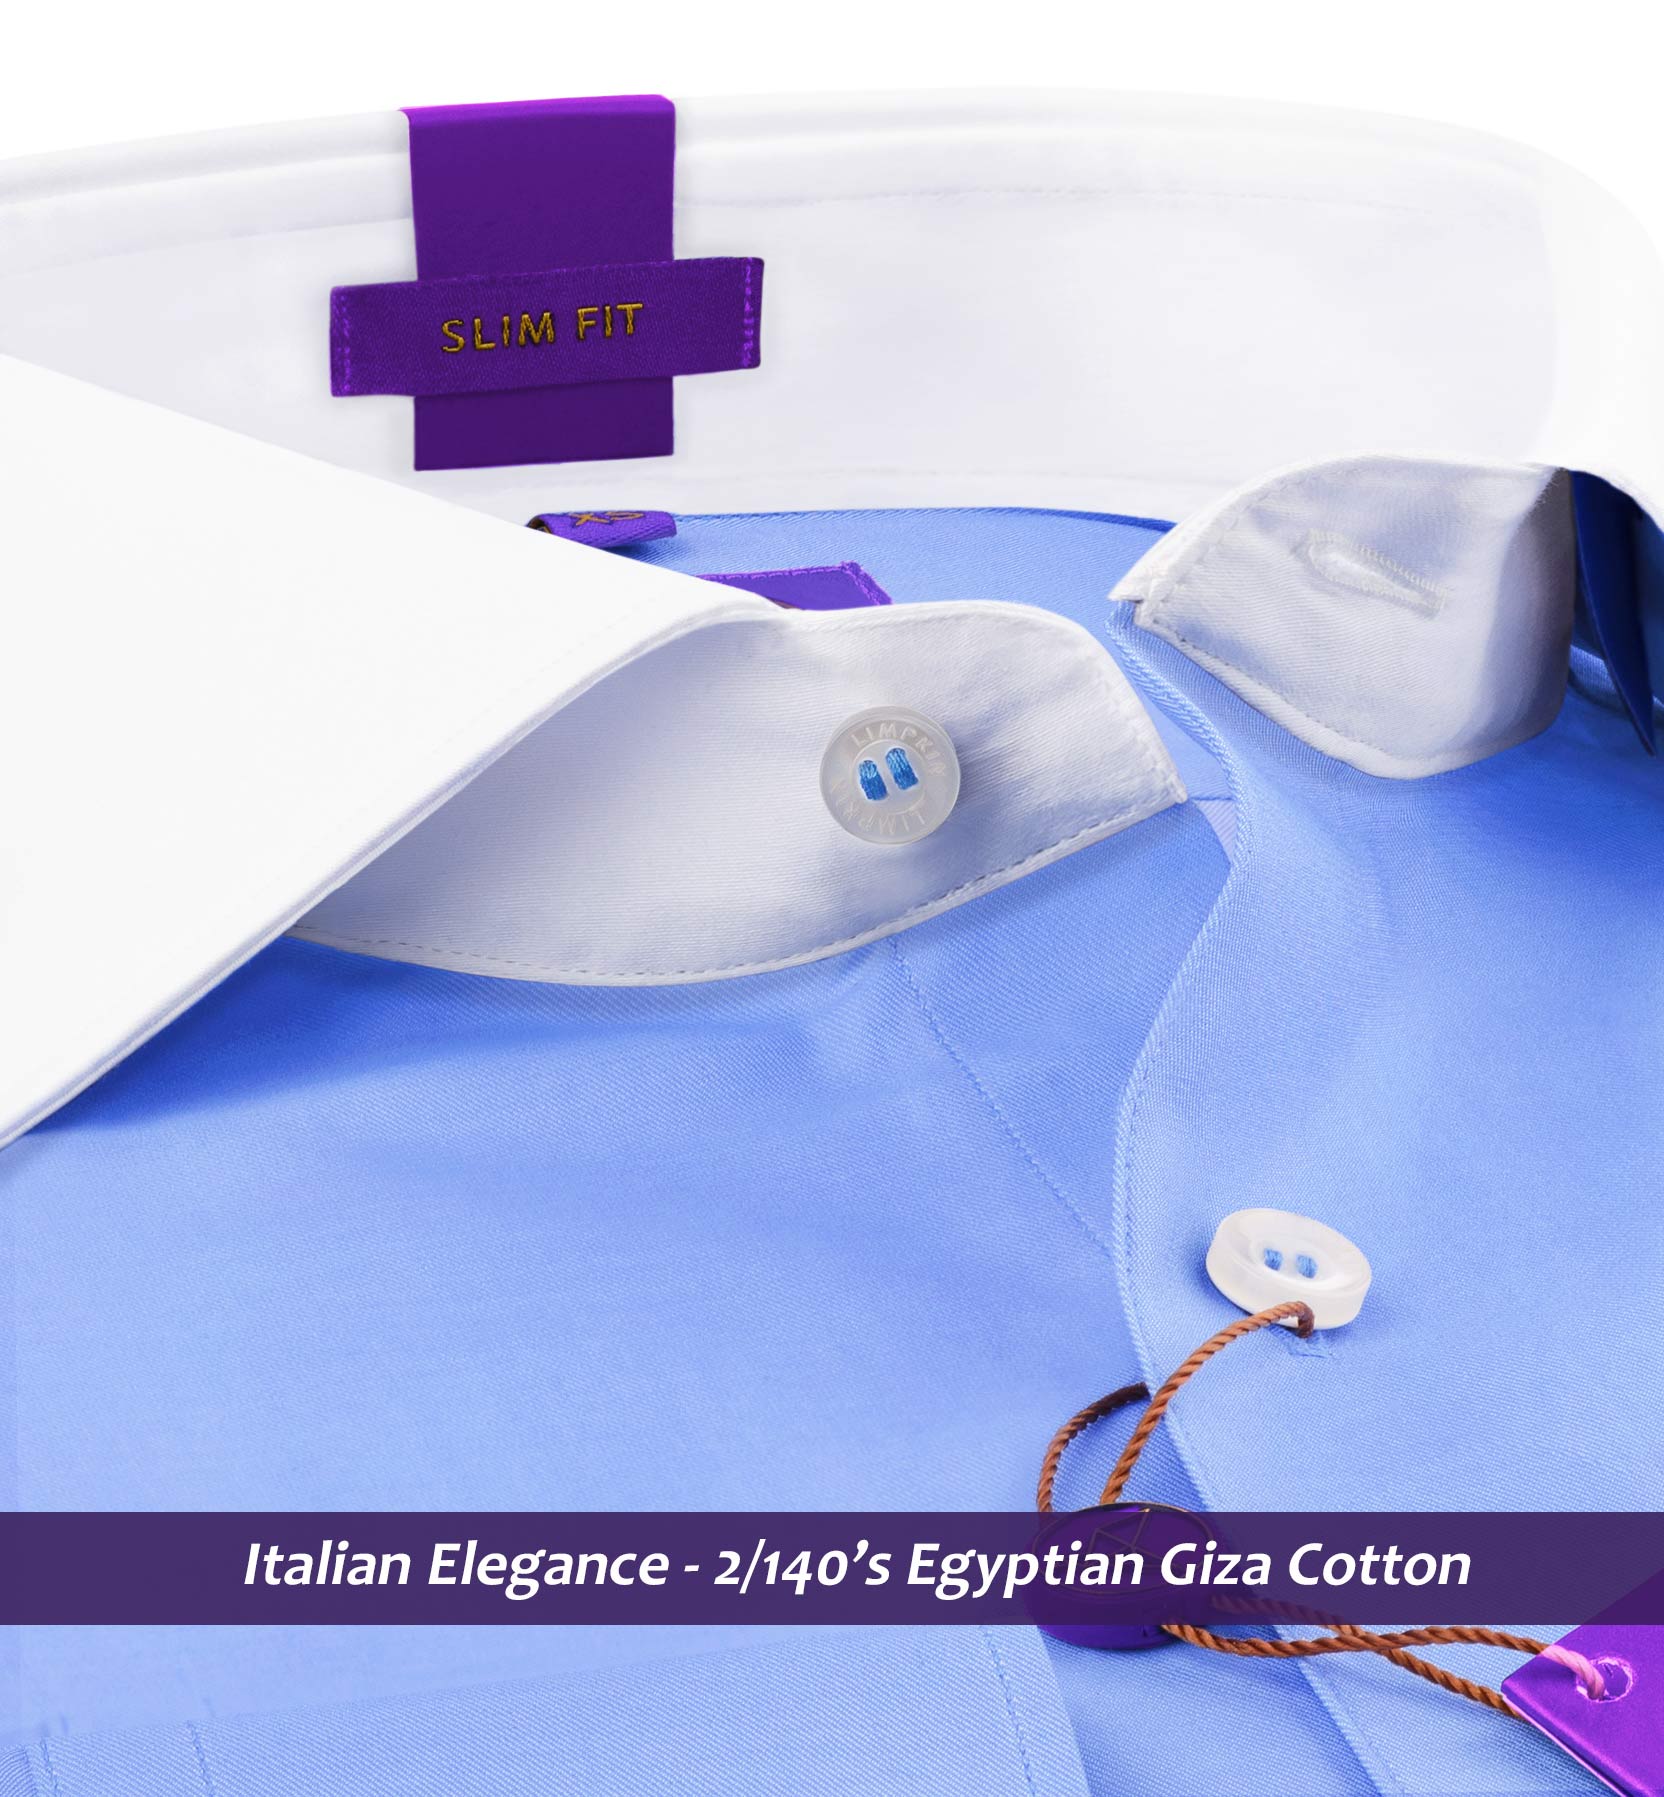 Wembley- The Best Azure Blue- White Collar- 2/140 Egyptian Giza Cotton- Delivery from 29th July